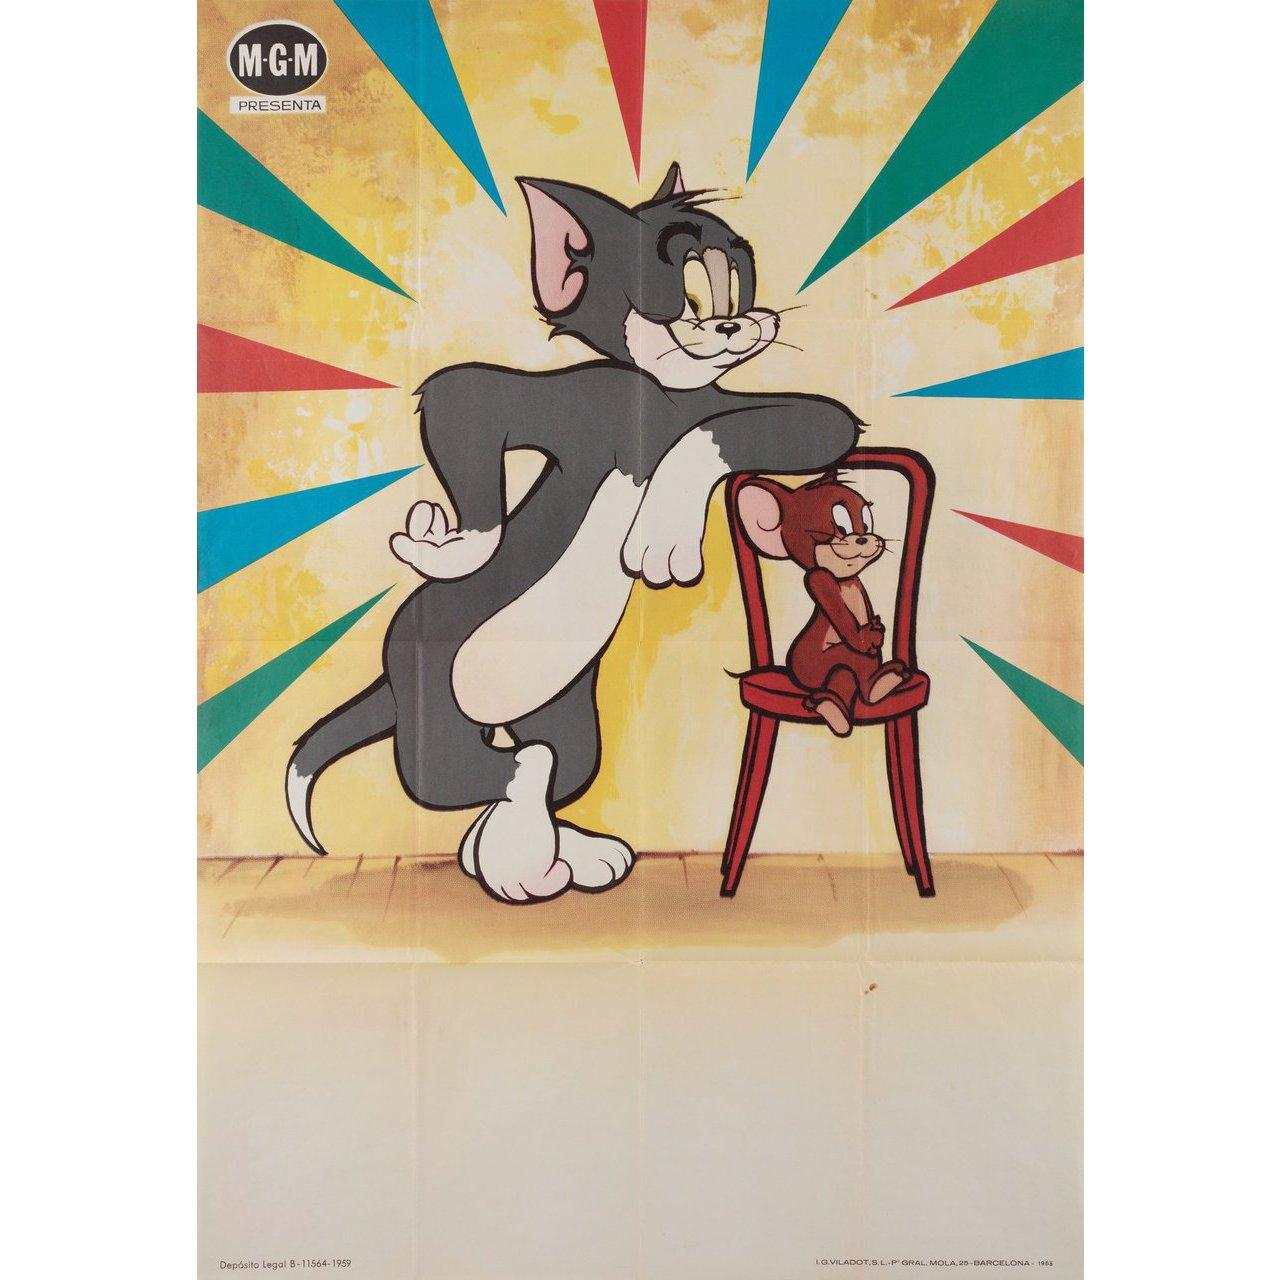 Original 1959 Spanish B1 poster for the 1940s film Tom and Jerry. Very Good-Fine condition, folded with slight staining on back that bleeds through. Many original posters were issued folded or were subsequently folded. Please note: the size is